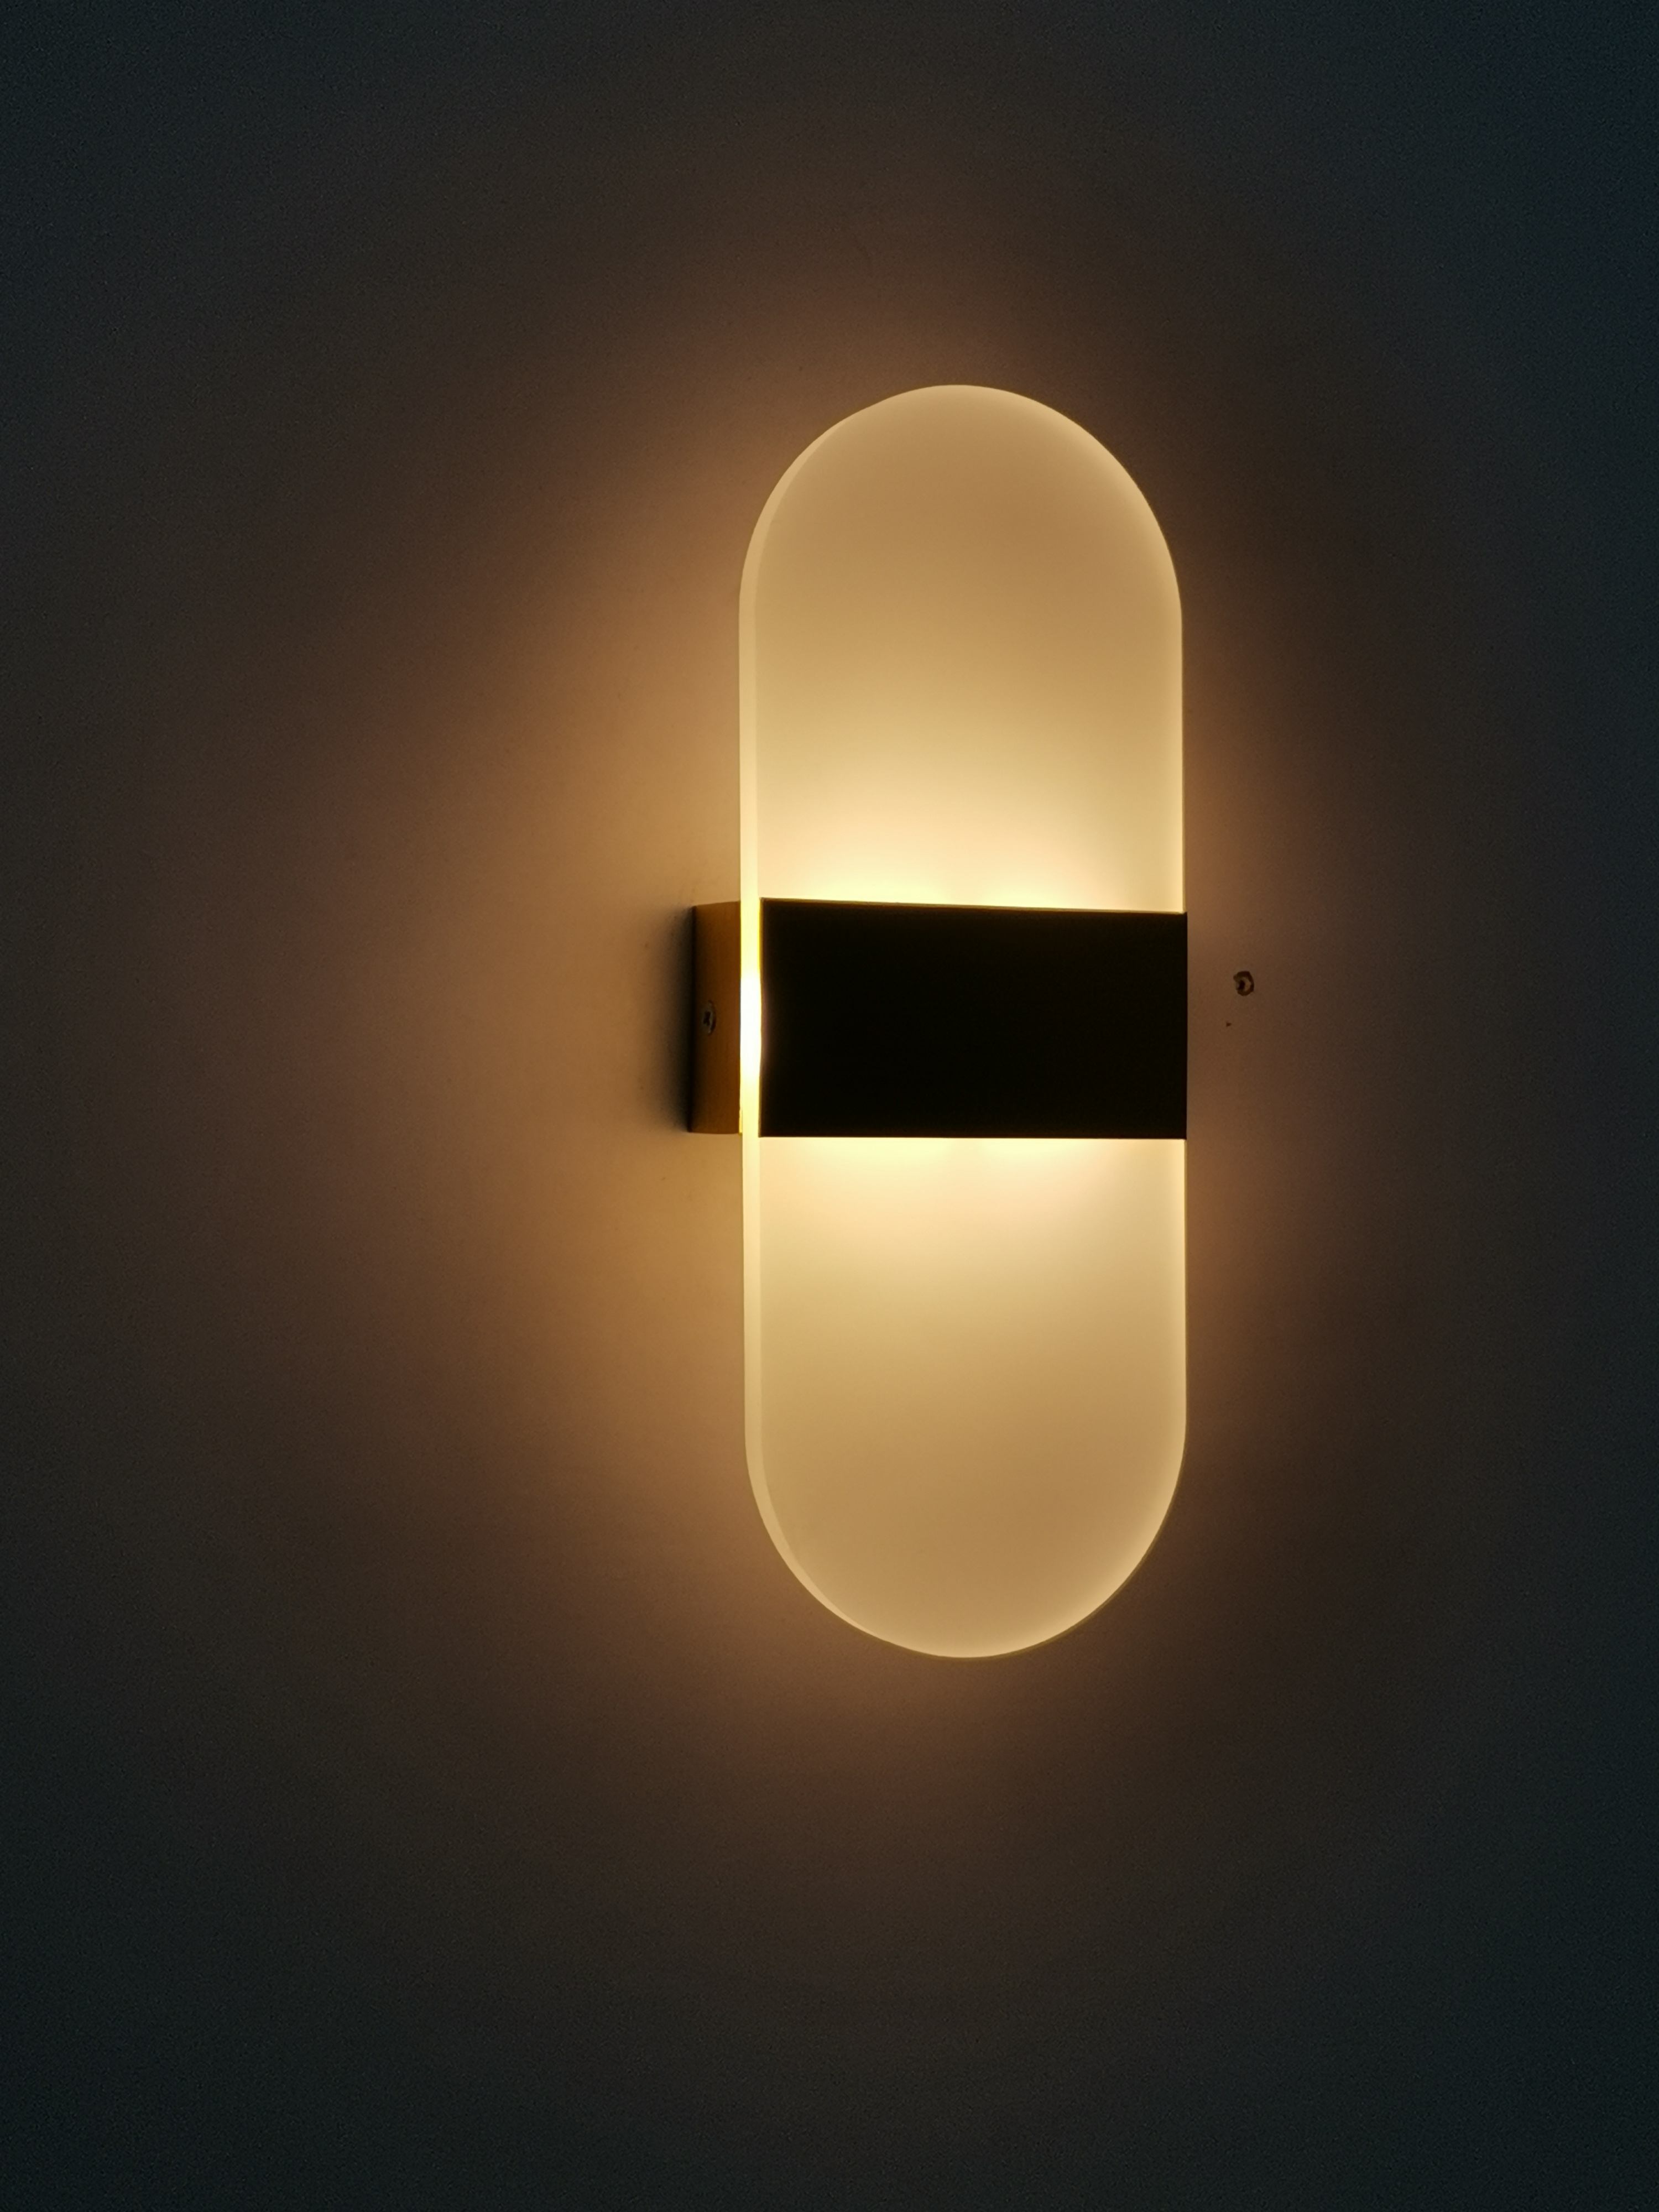 6W Oval Wall Lamp Acrylic Wall Lamp Rectangular Wall Lamp LED Wall Sconces AC85-265V Indoor Aluminum Round Shape Lights Wall Mount Lamp for Living Room Bedroom Hotel Restaurant Lighting